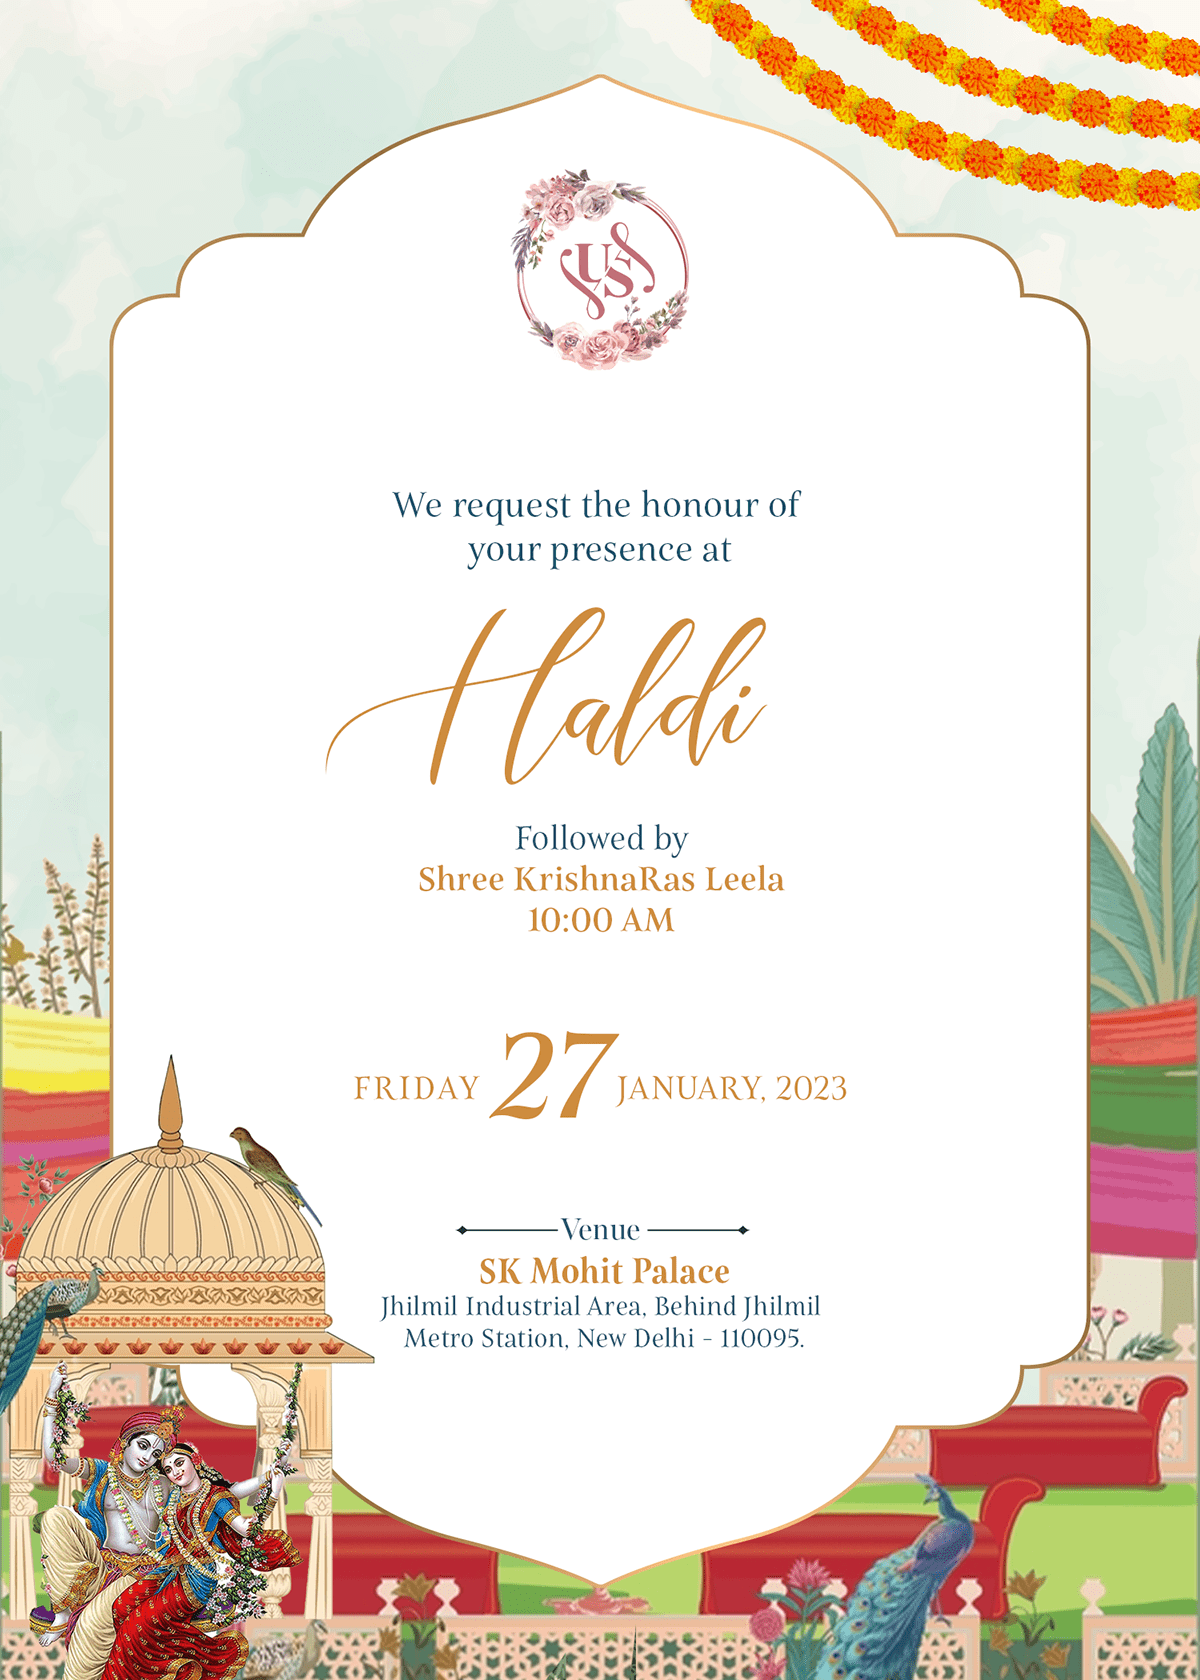 eInvite invites marriage mughal art Mughal wedding save the date Traditional Invitations Wedding Card wedding cards wedding invitation